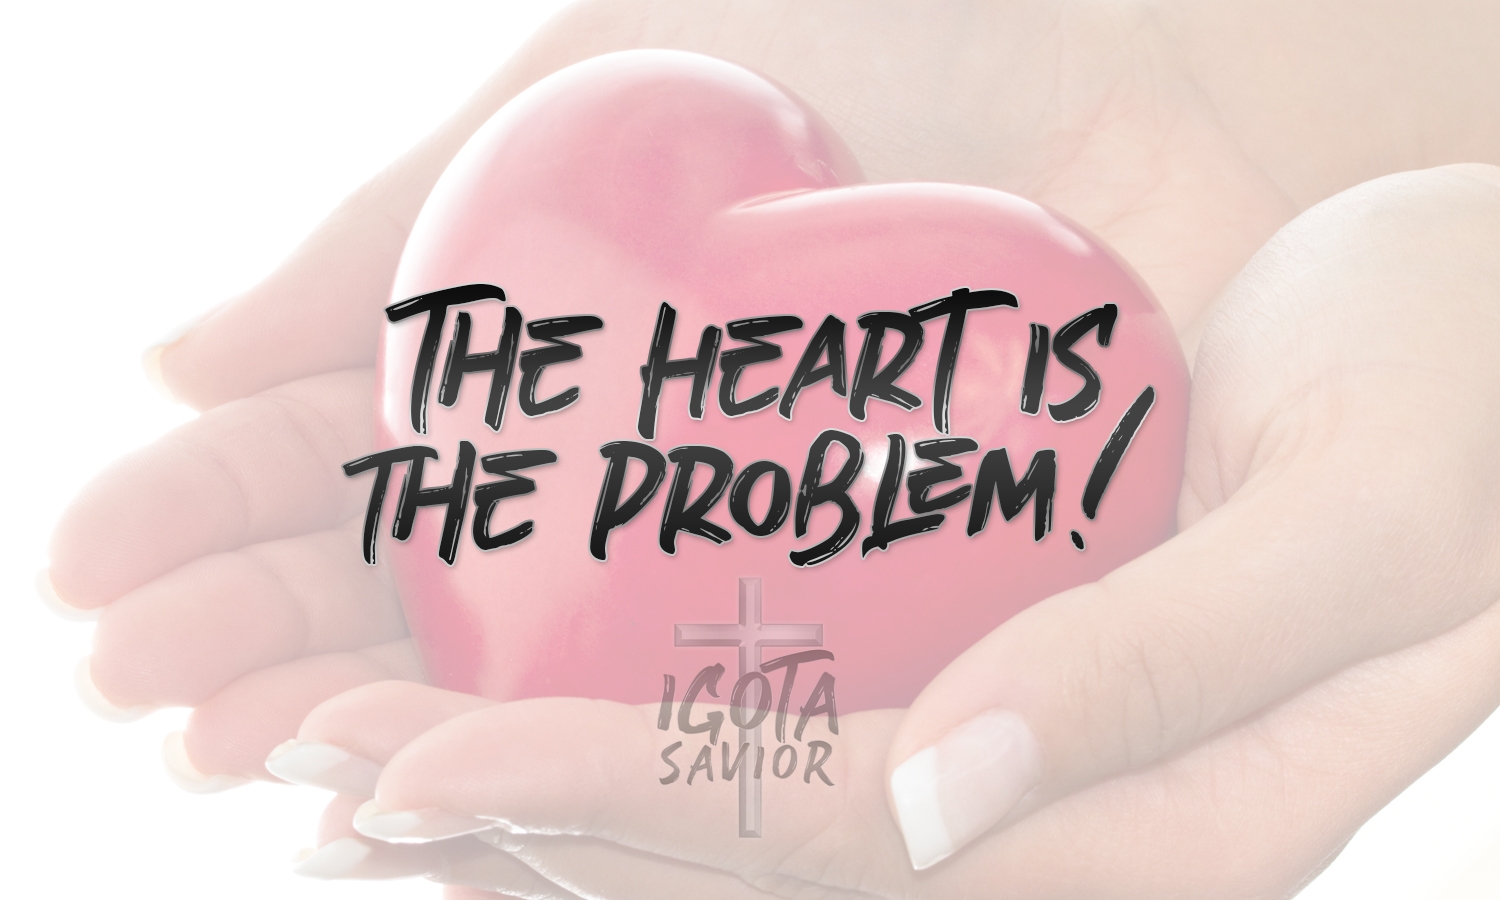 The Heart Is The Problem!